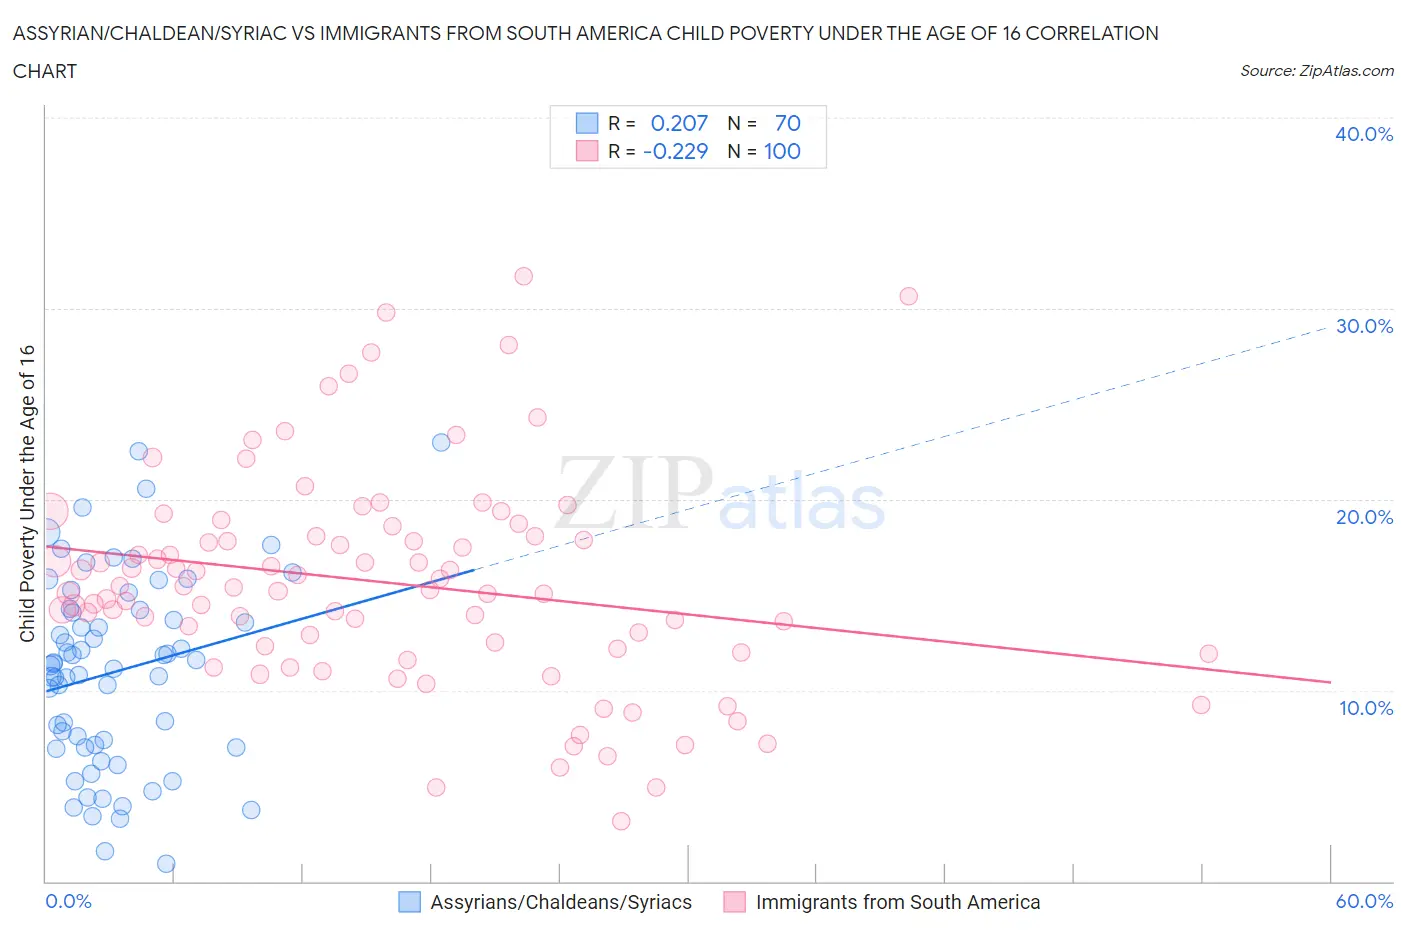 Assyrian/Chaldean/Syriac vs Immigrants from South America Child Poverty Under the Age of 16